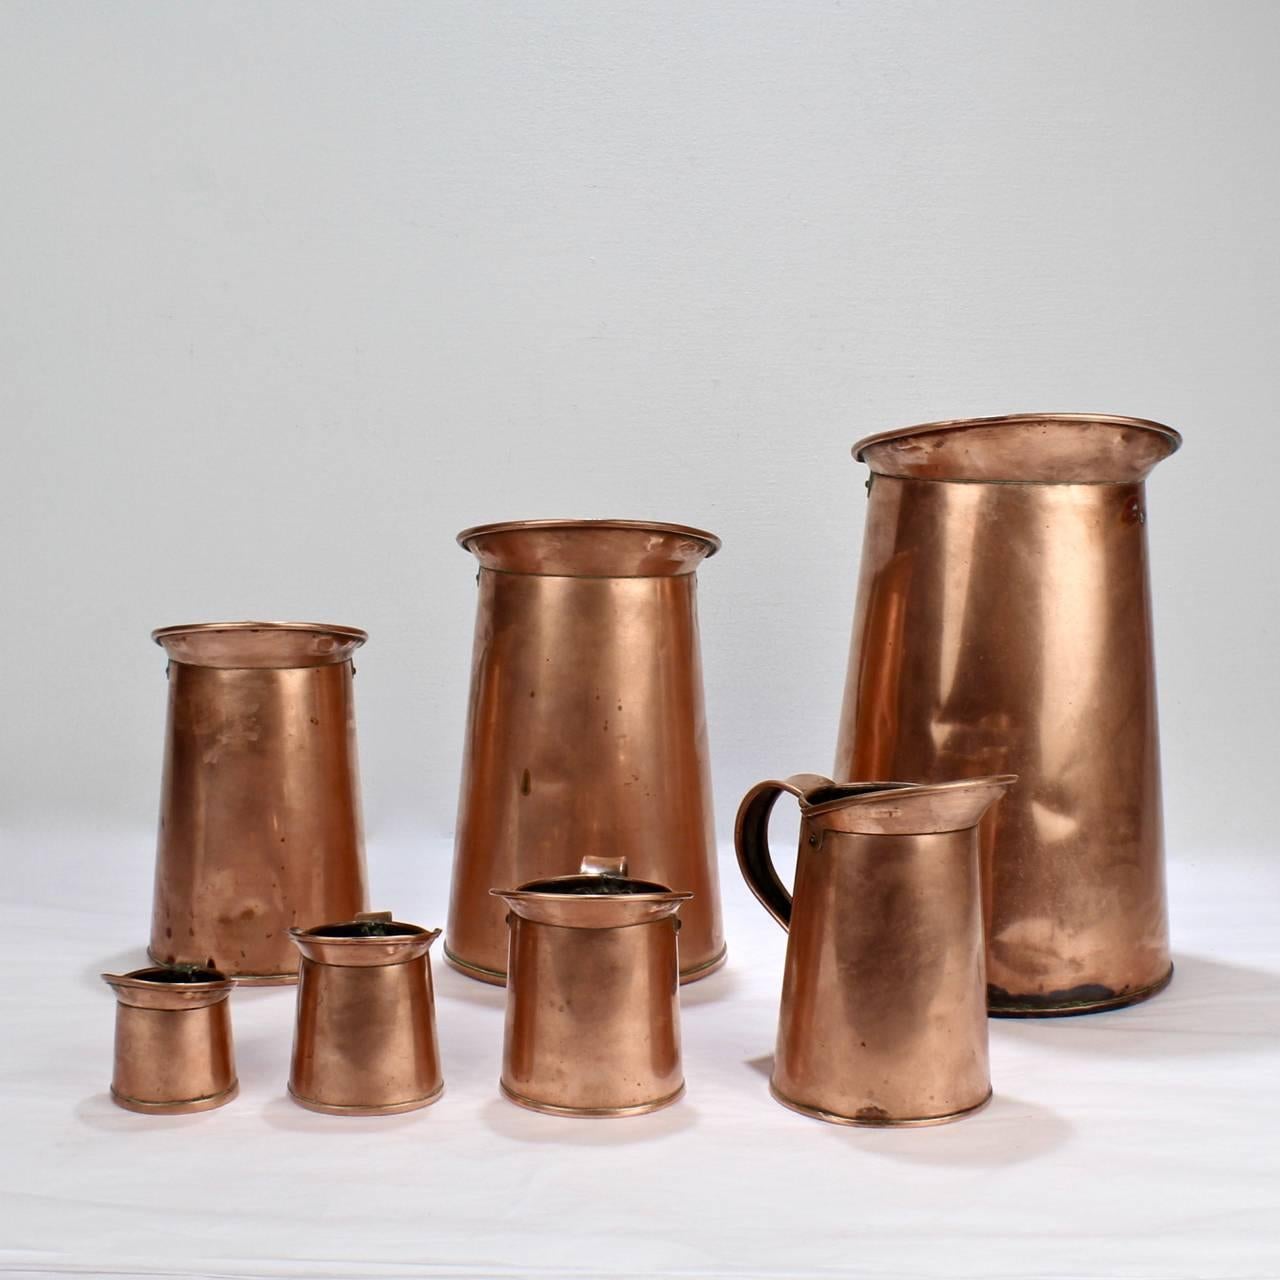 American Set of Seven Antique 19th Century New York Graduated Copper Measures by B. Budde